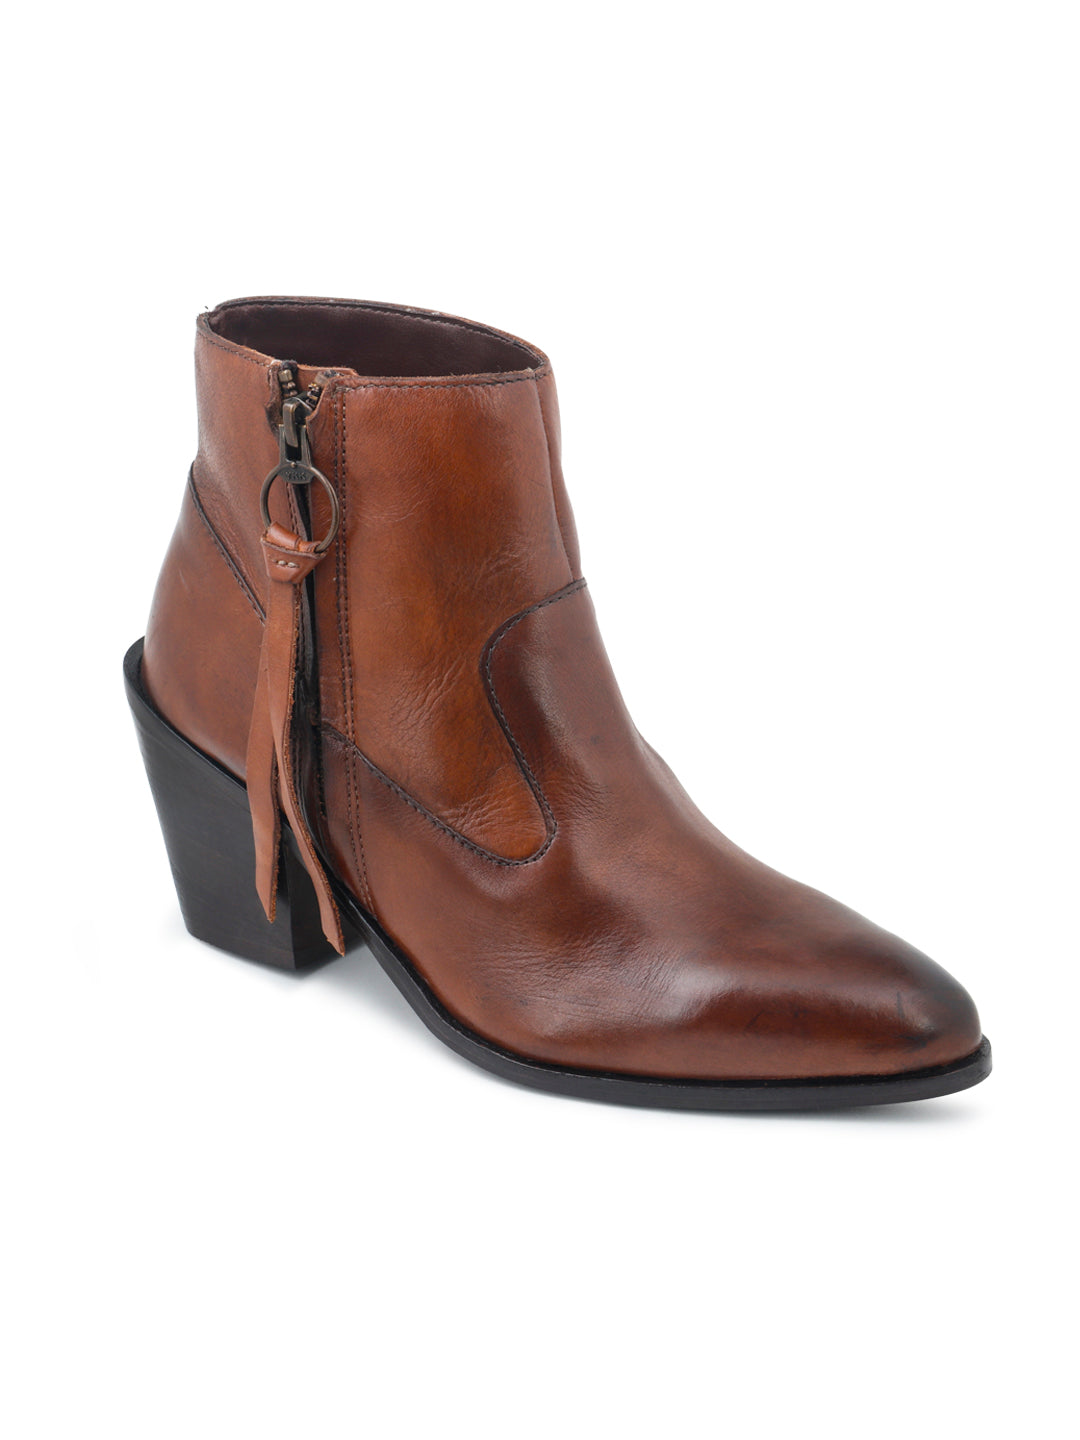 Brown Ankle Boots with Zipper - Brown